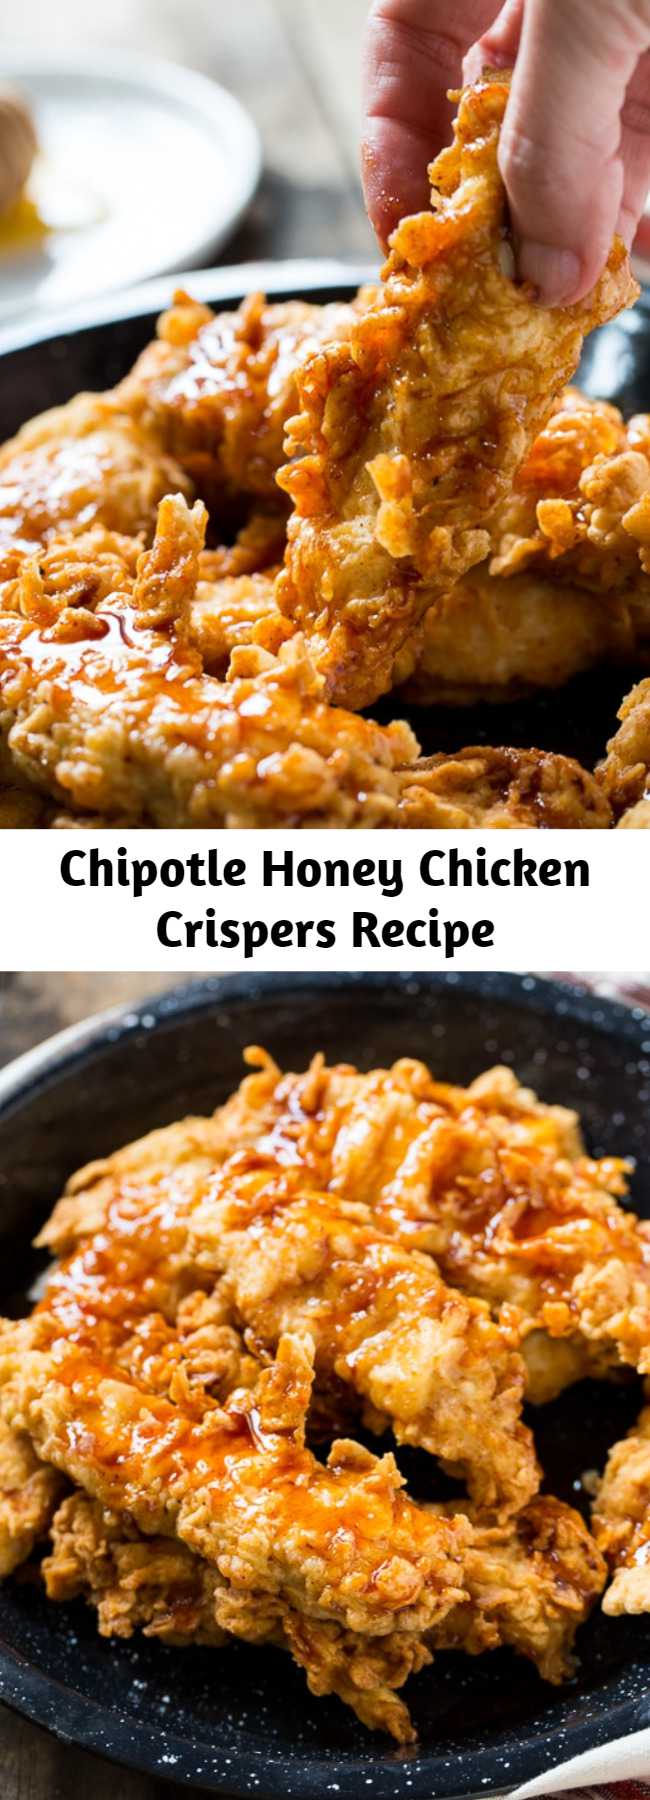 Chipotle Honey Chicken Crispers Recipe - These Honey Chipotle Chicken Crispers are a Chili's copycat. Crispy fried chicken tenders coated in a sweet and spicy sauce.